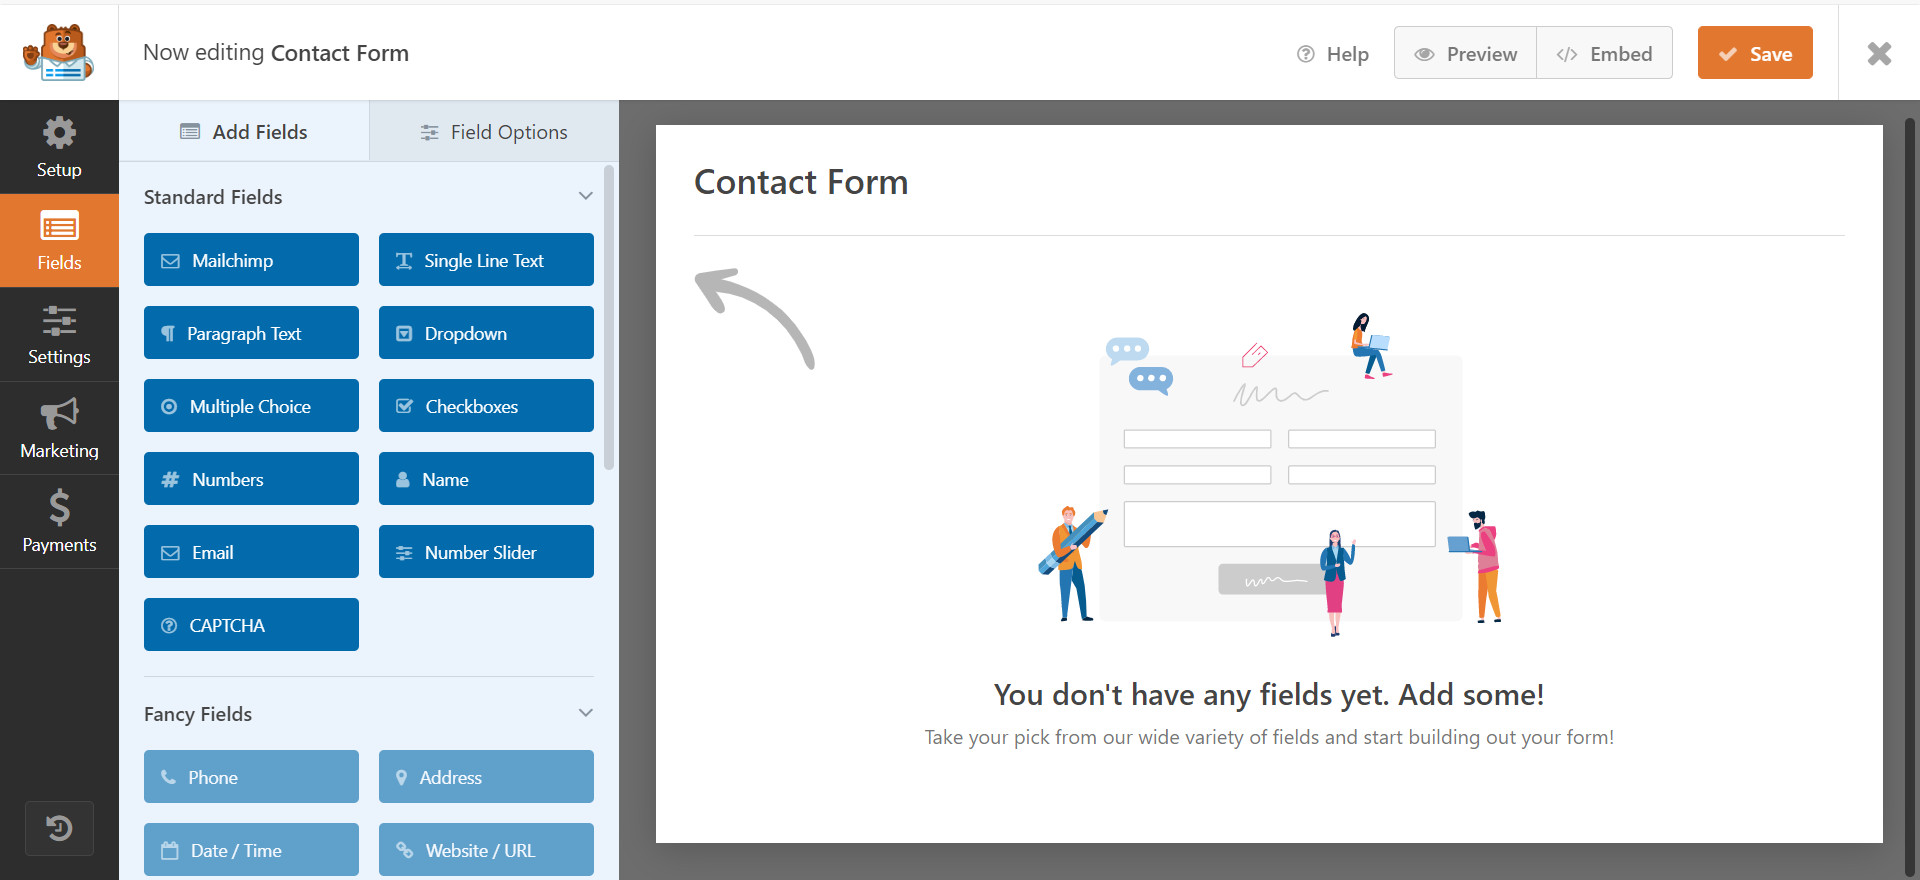 create contact form